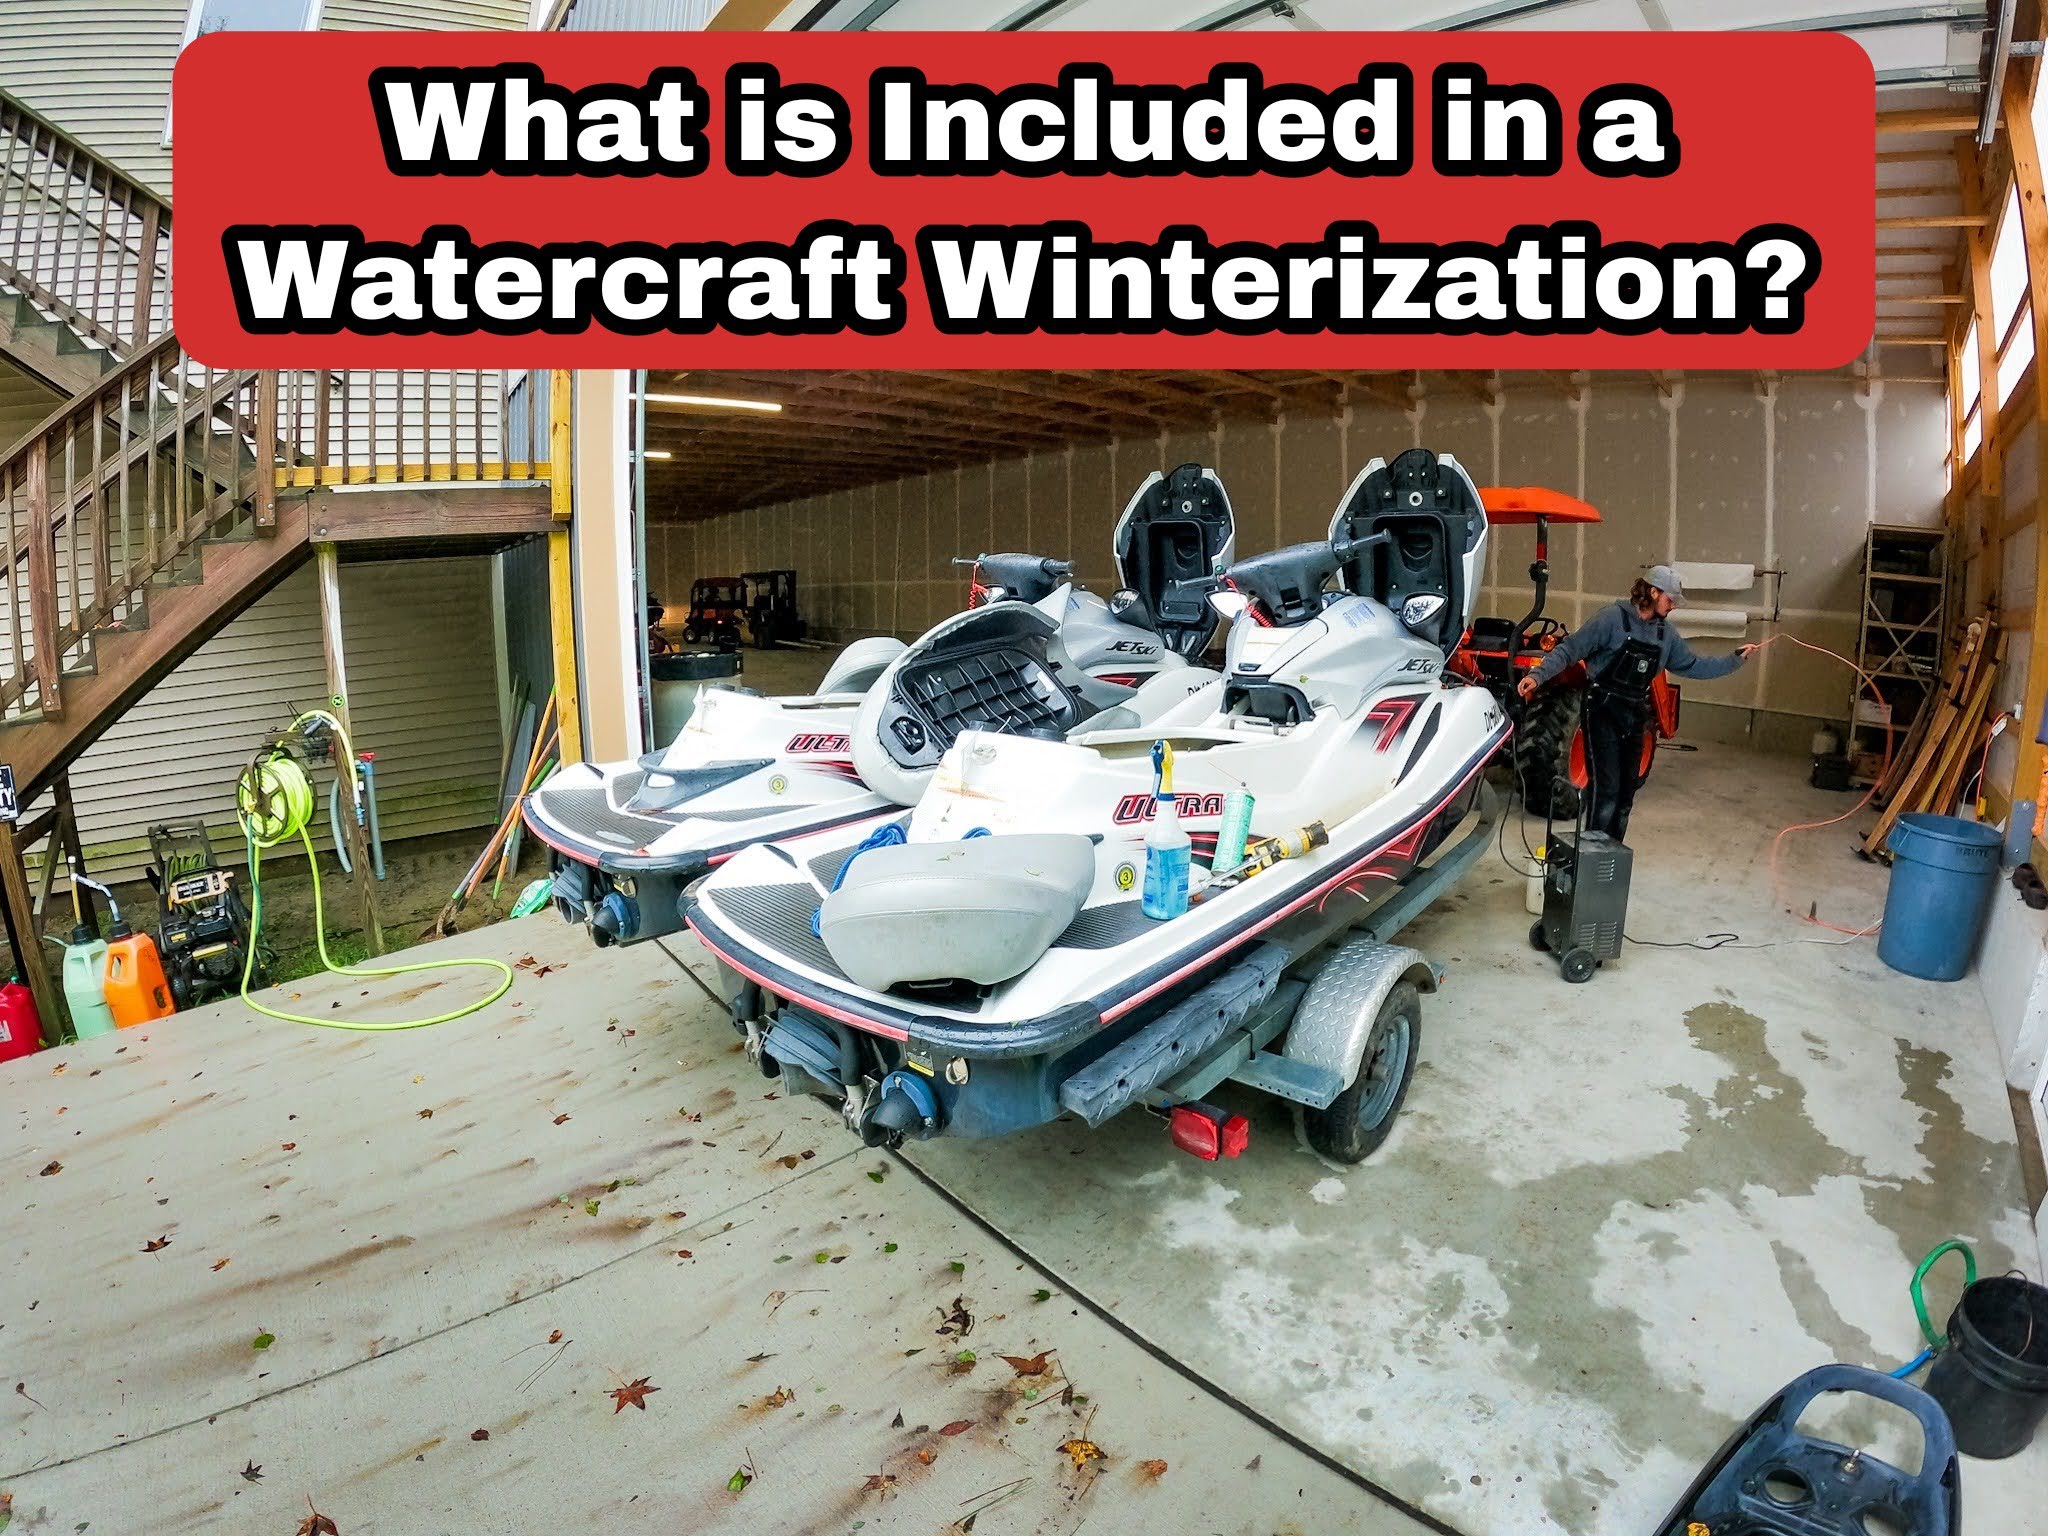 What is Included in a Boat and Jetski Winterization?